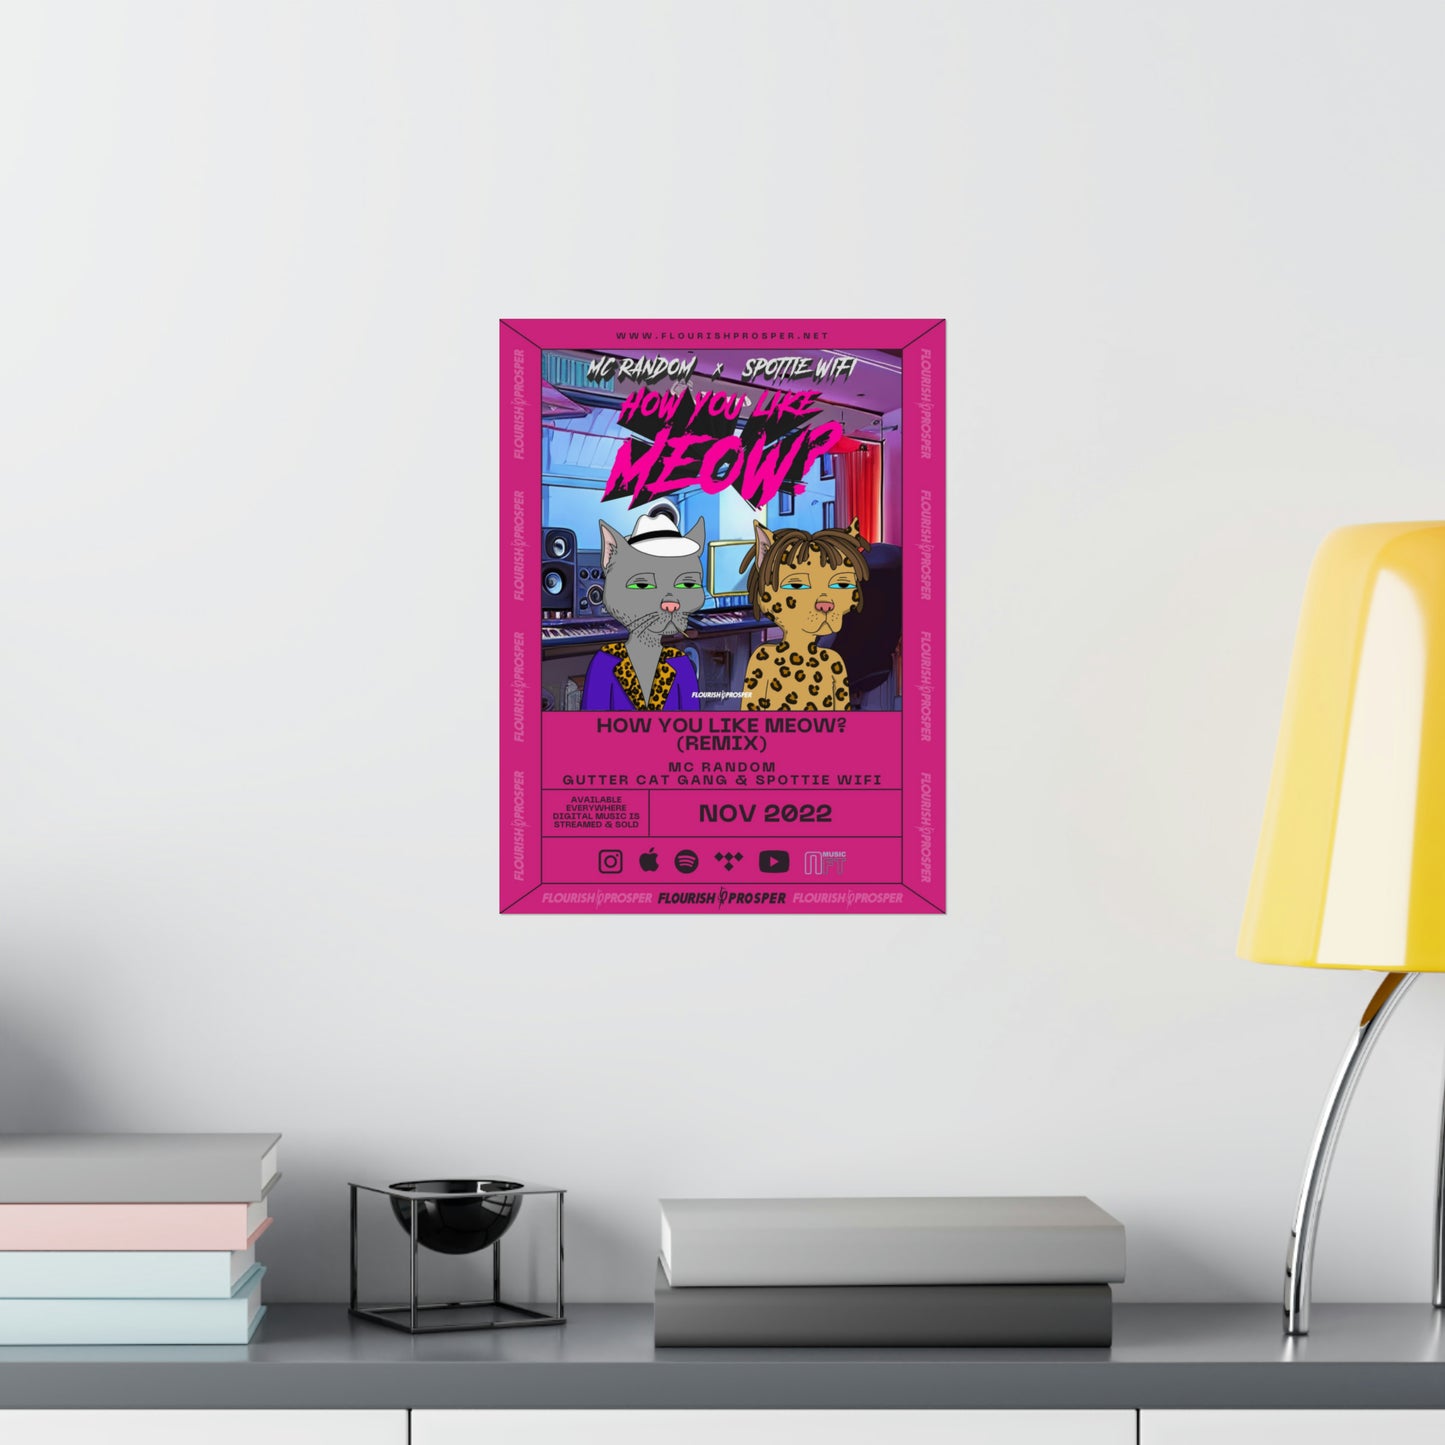 MC Random, Gutter Cat Gang, and Spottie WiFi "How You Like Meow? (Remix)" Matte Vertical Posters